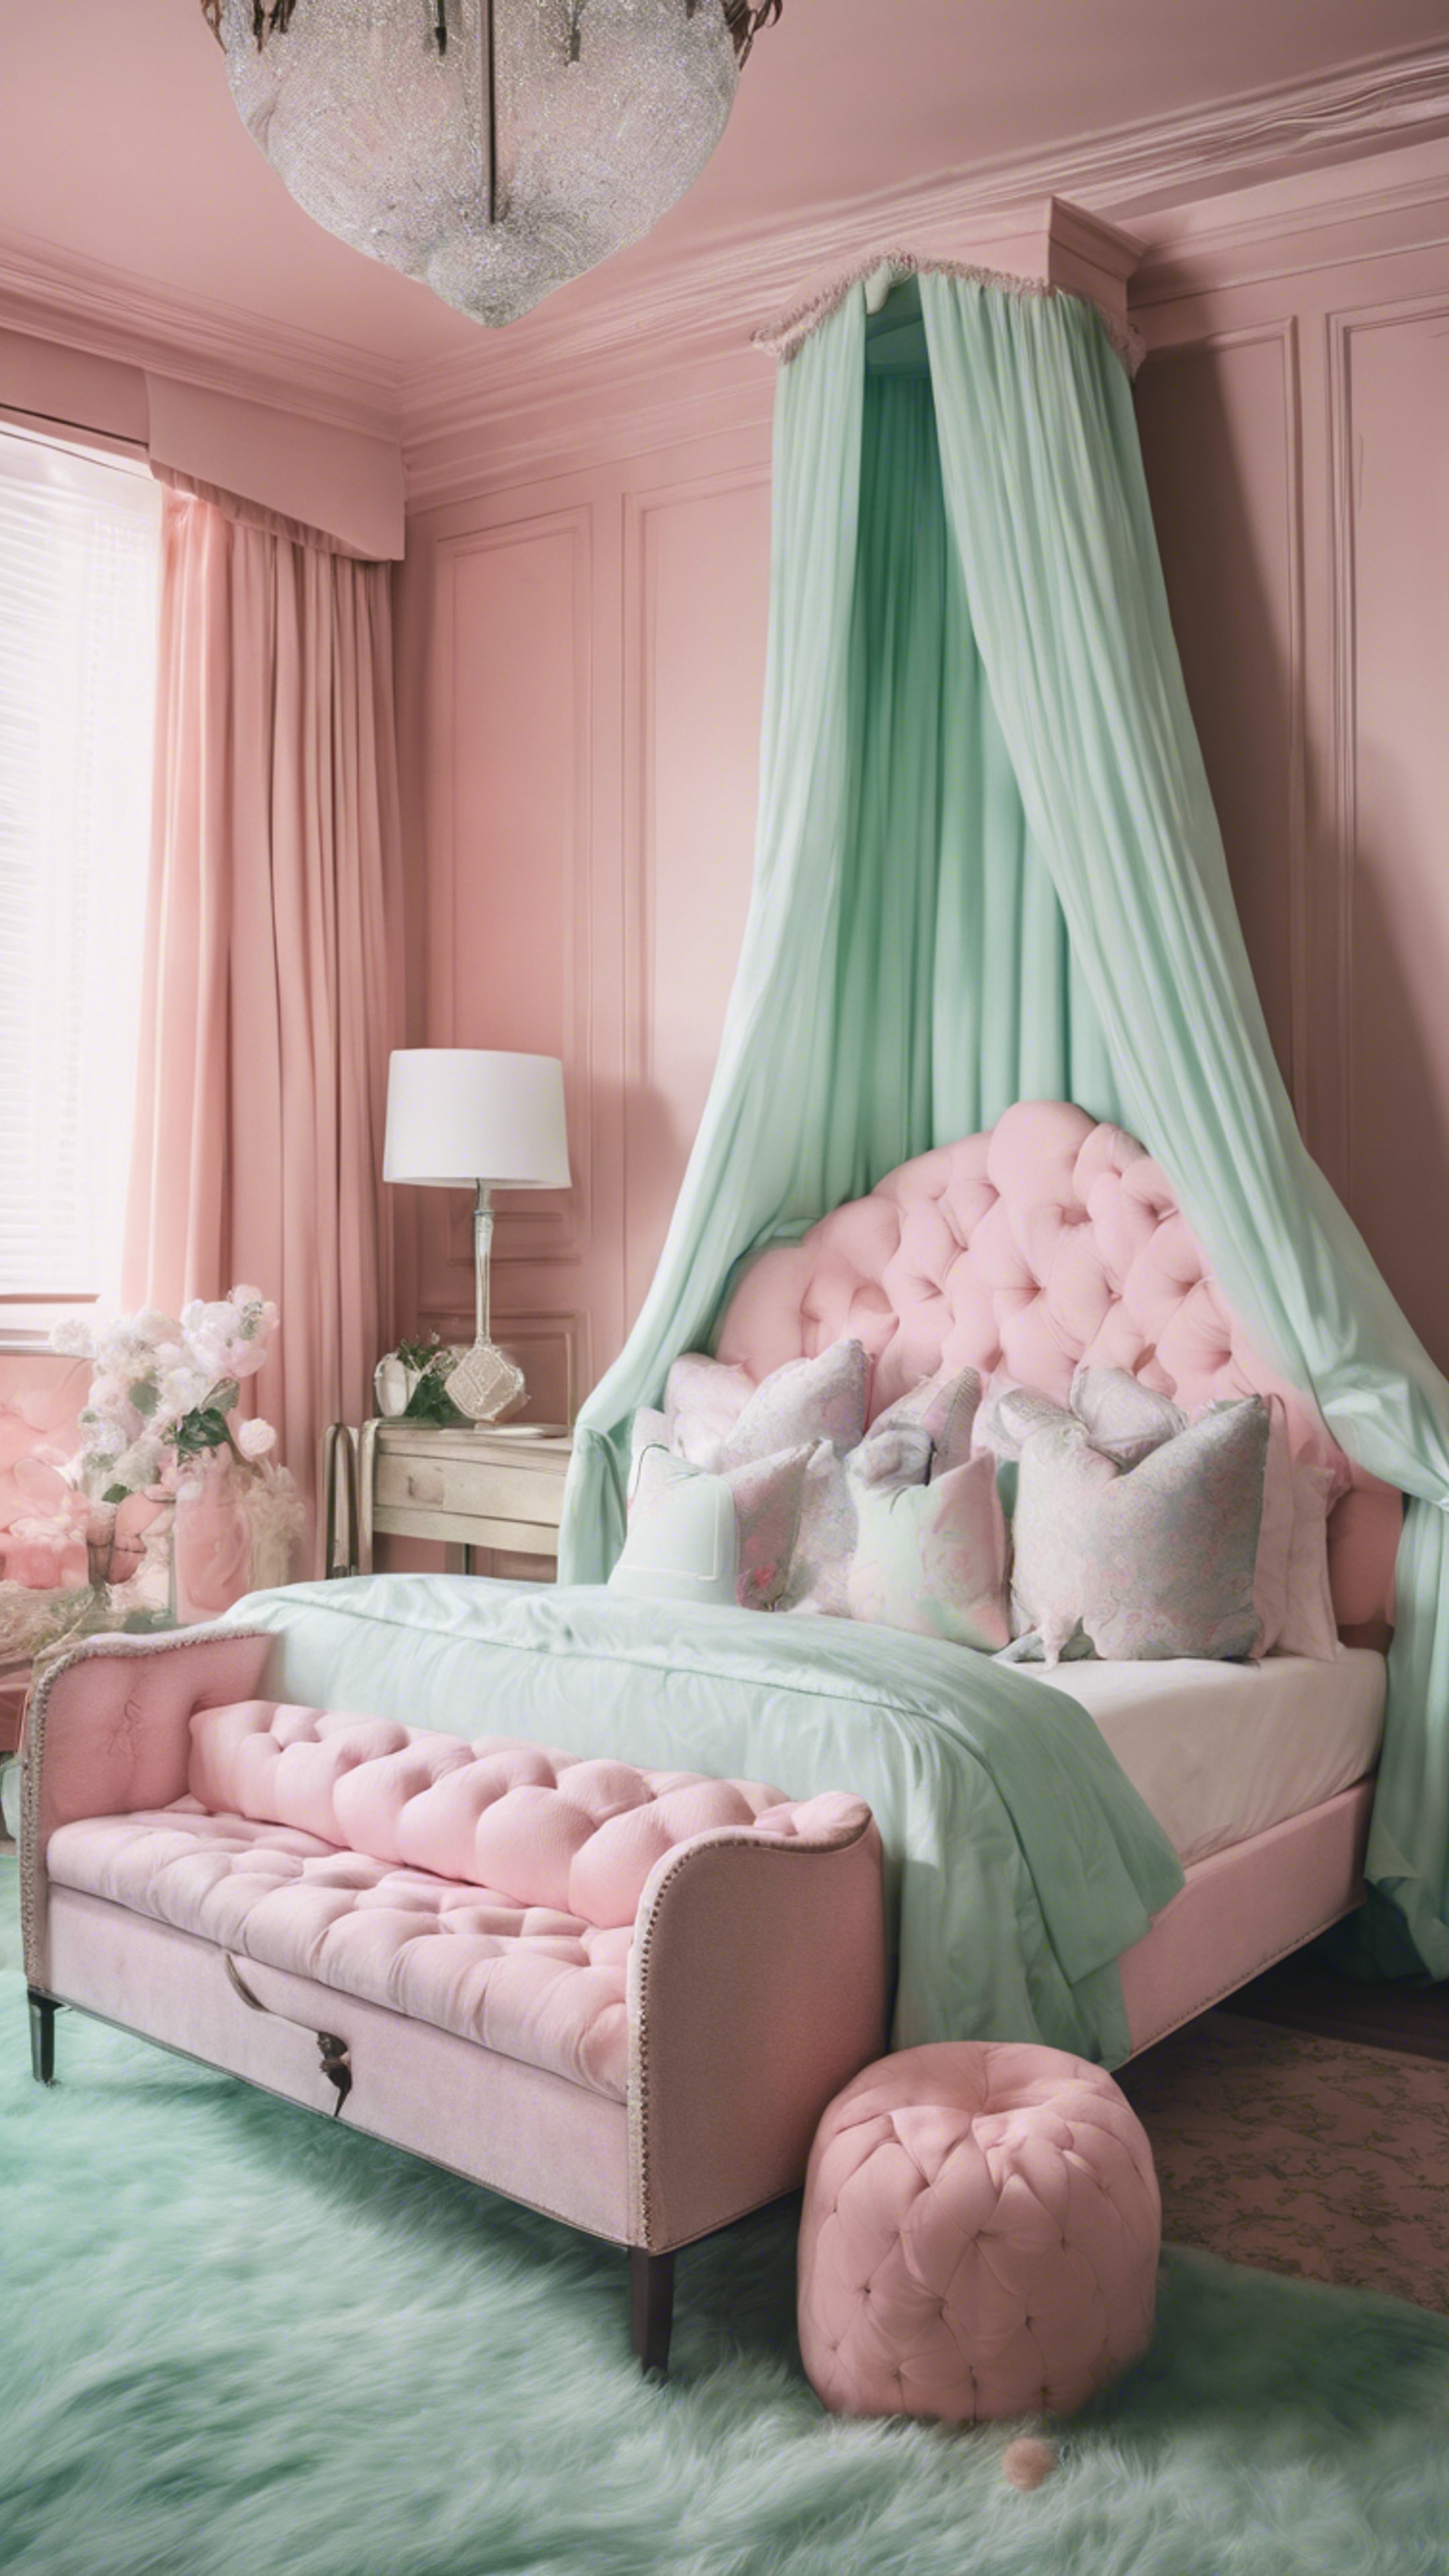 A sprawling pink and mint green preppy-style bedroom with a canopy bed and monogrammed pillows.壁紙[80ed71ae36e84fc093e2]